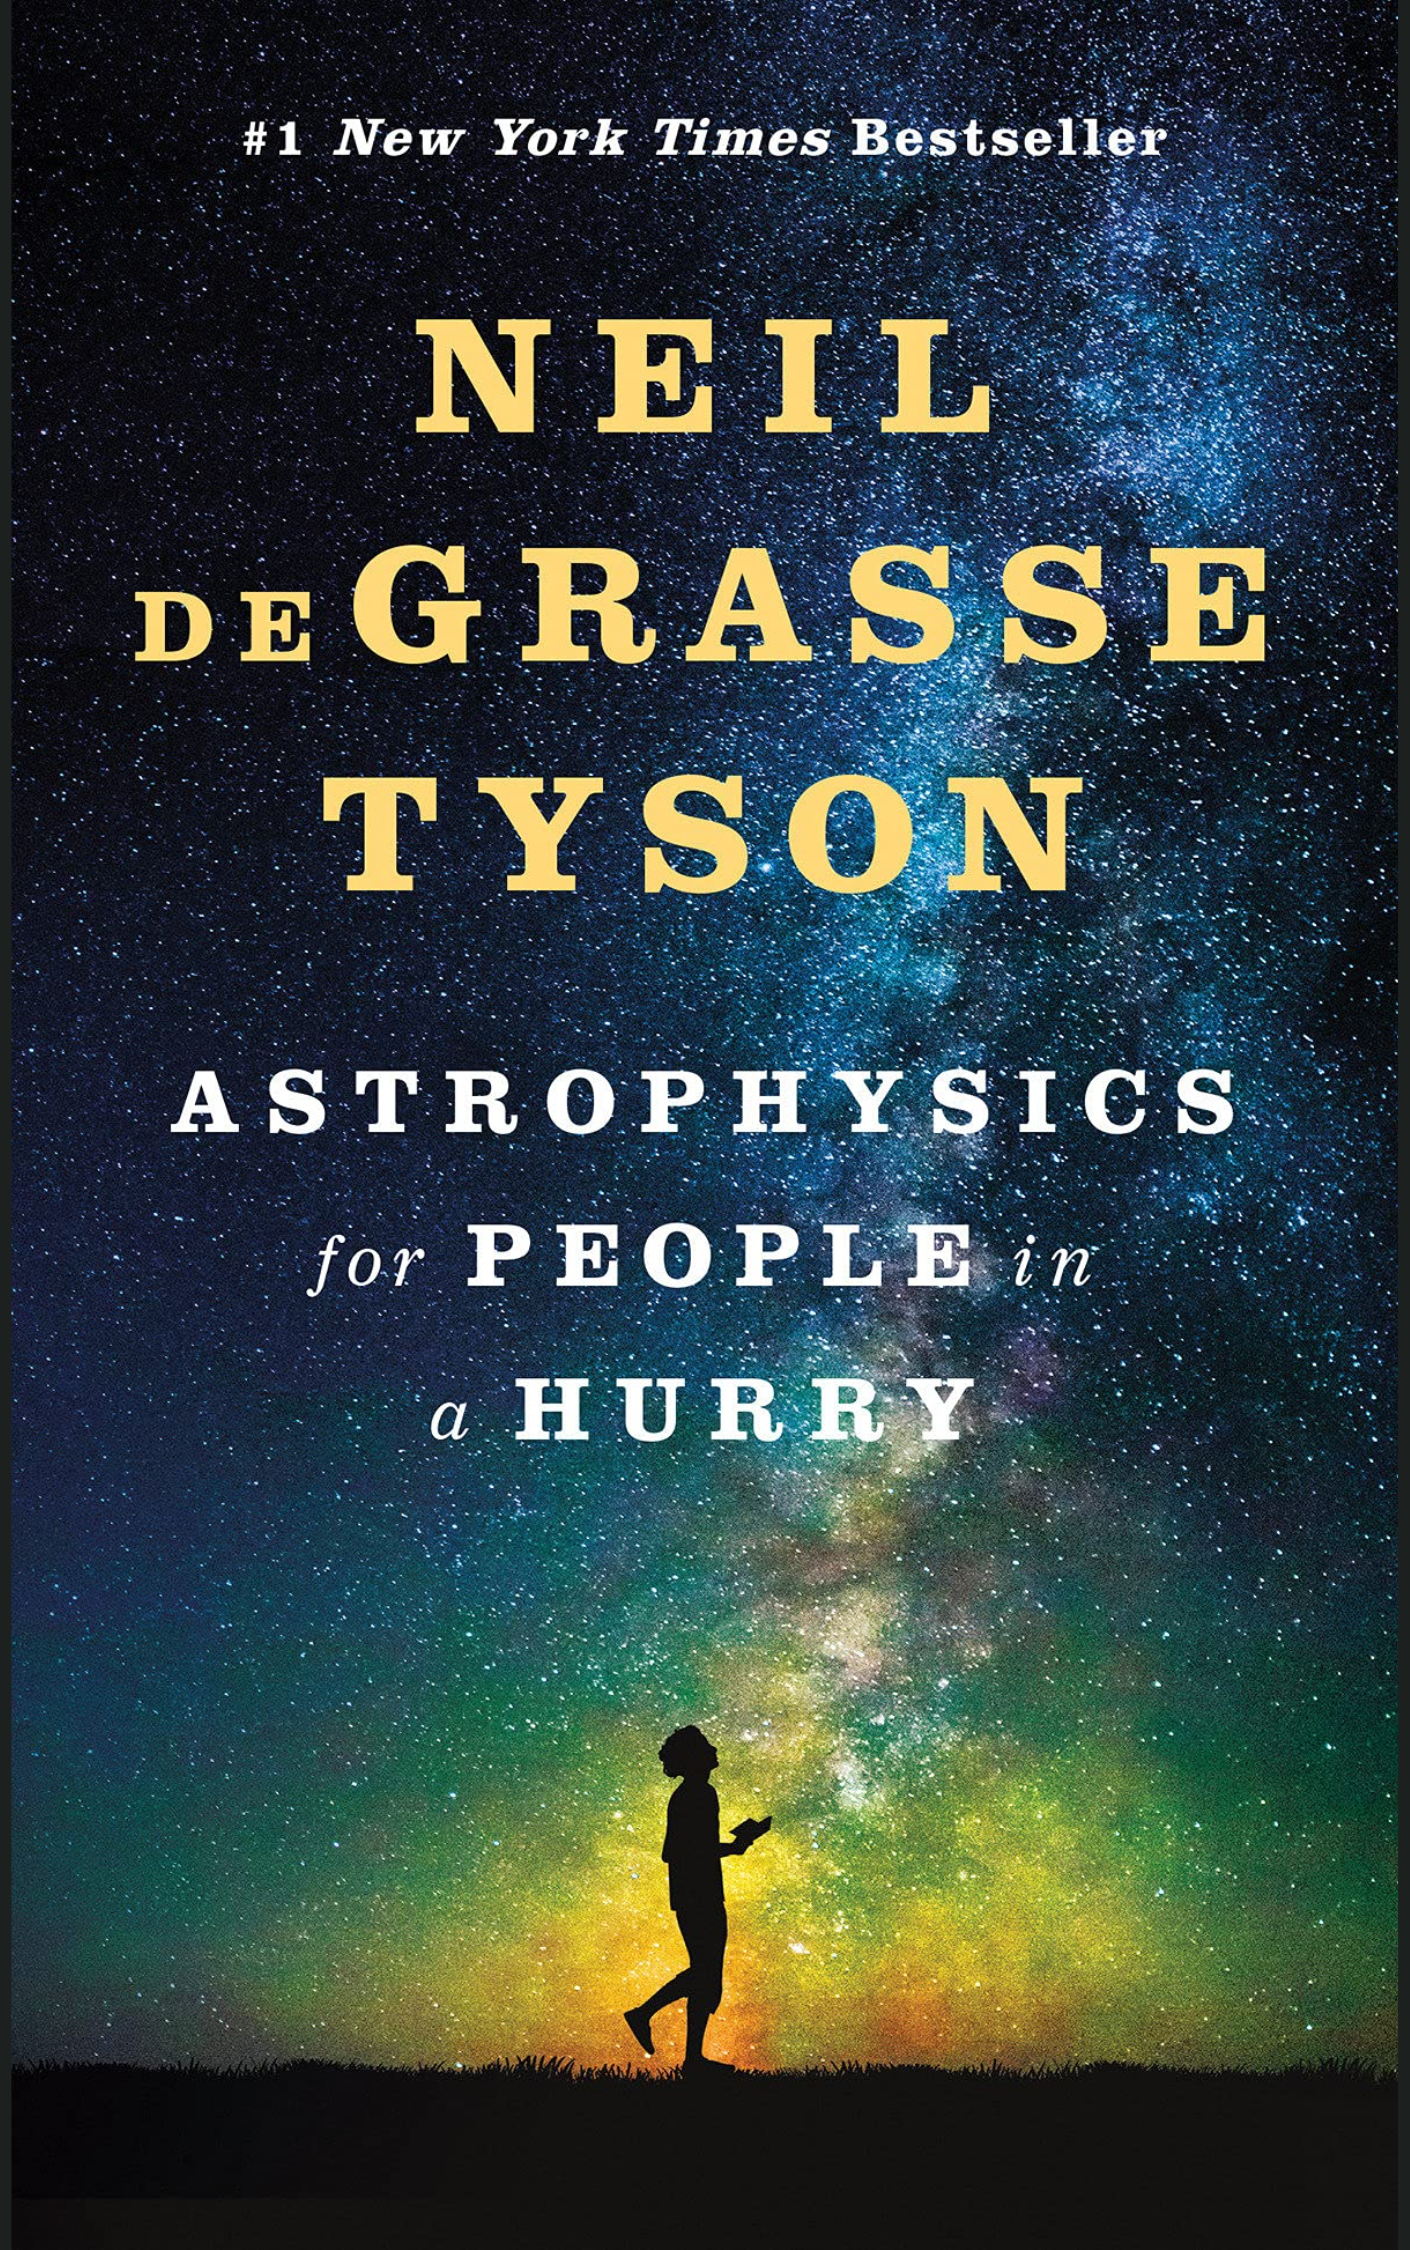 ASTROPHYSICS FOR PEOPLE IN A HURRY [HARDCOVER] by NEIL DEGRASSE TYSON